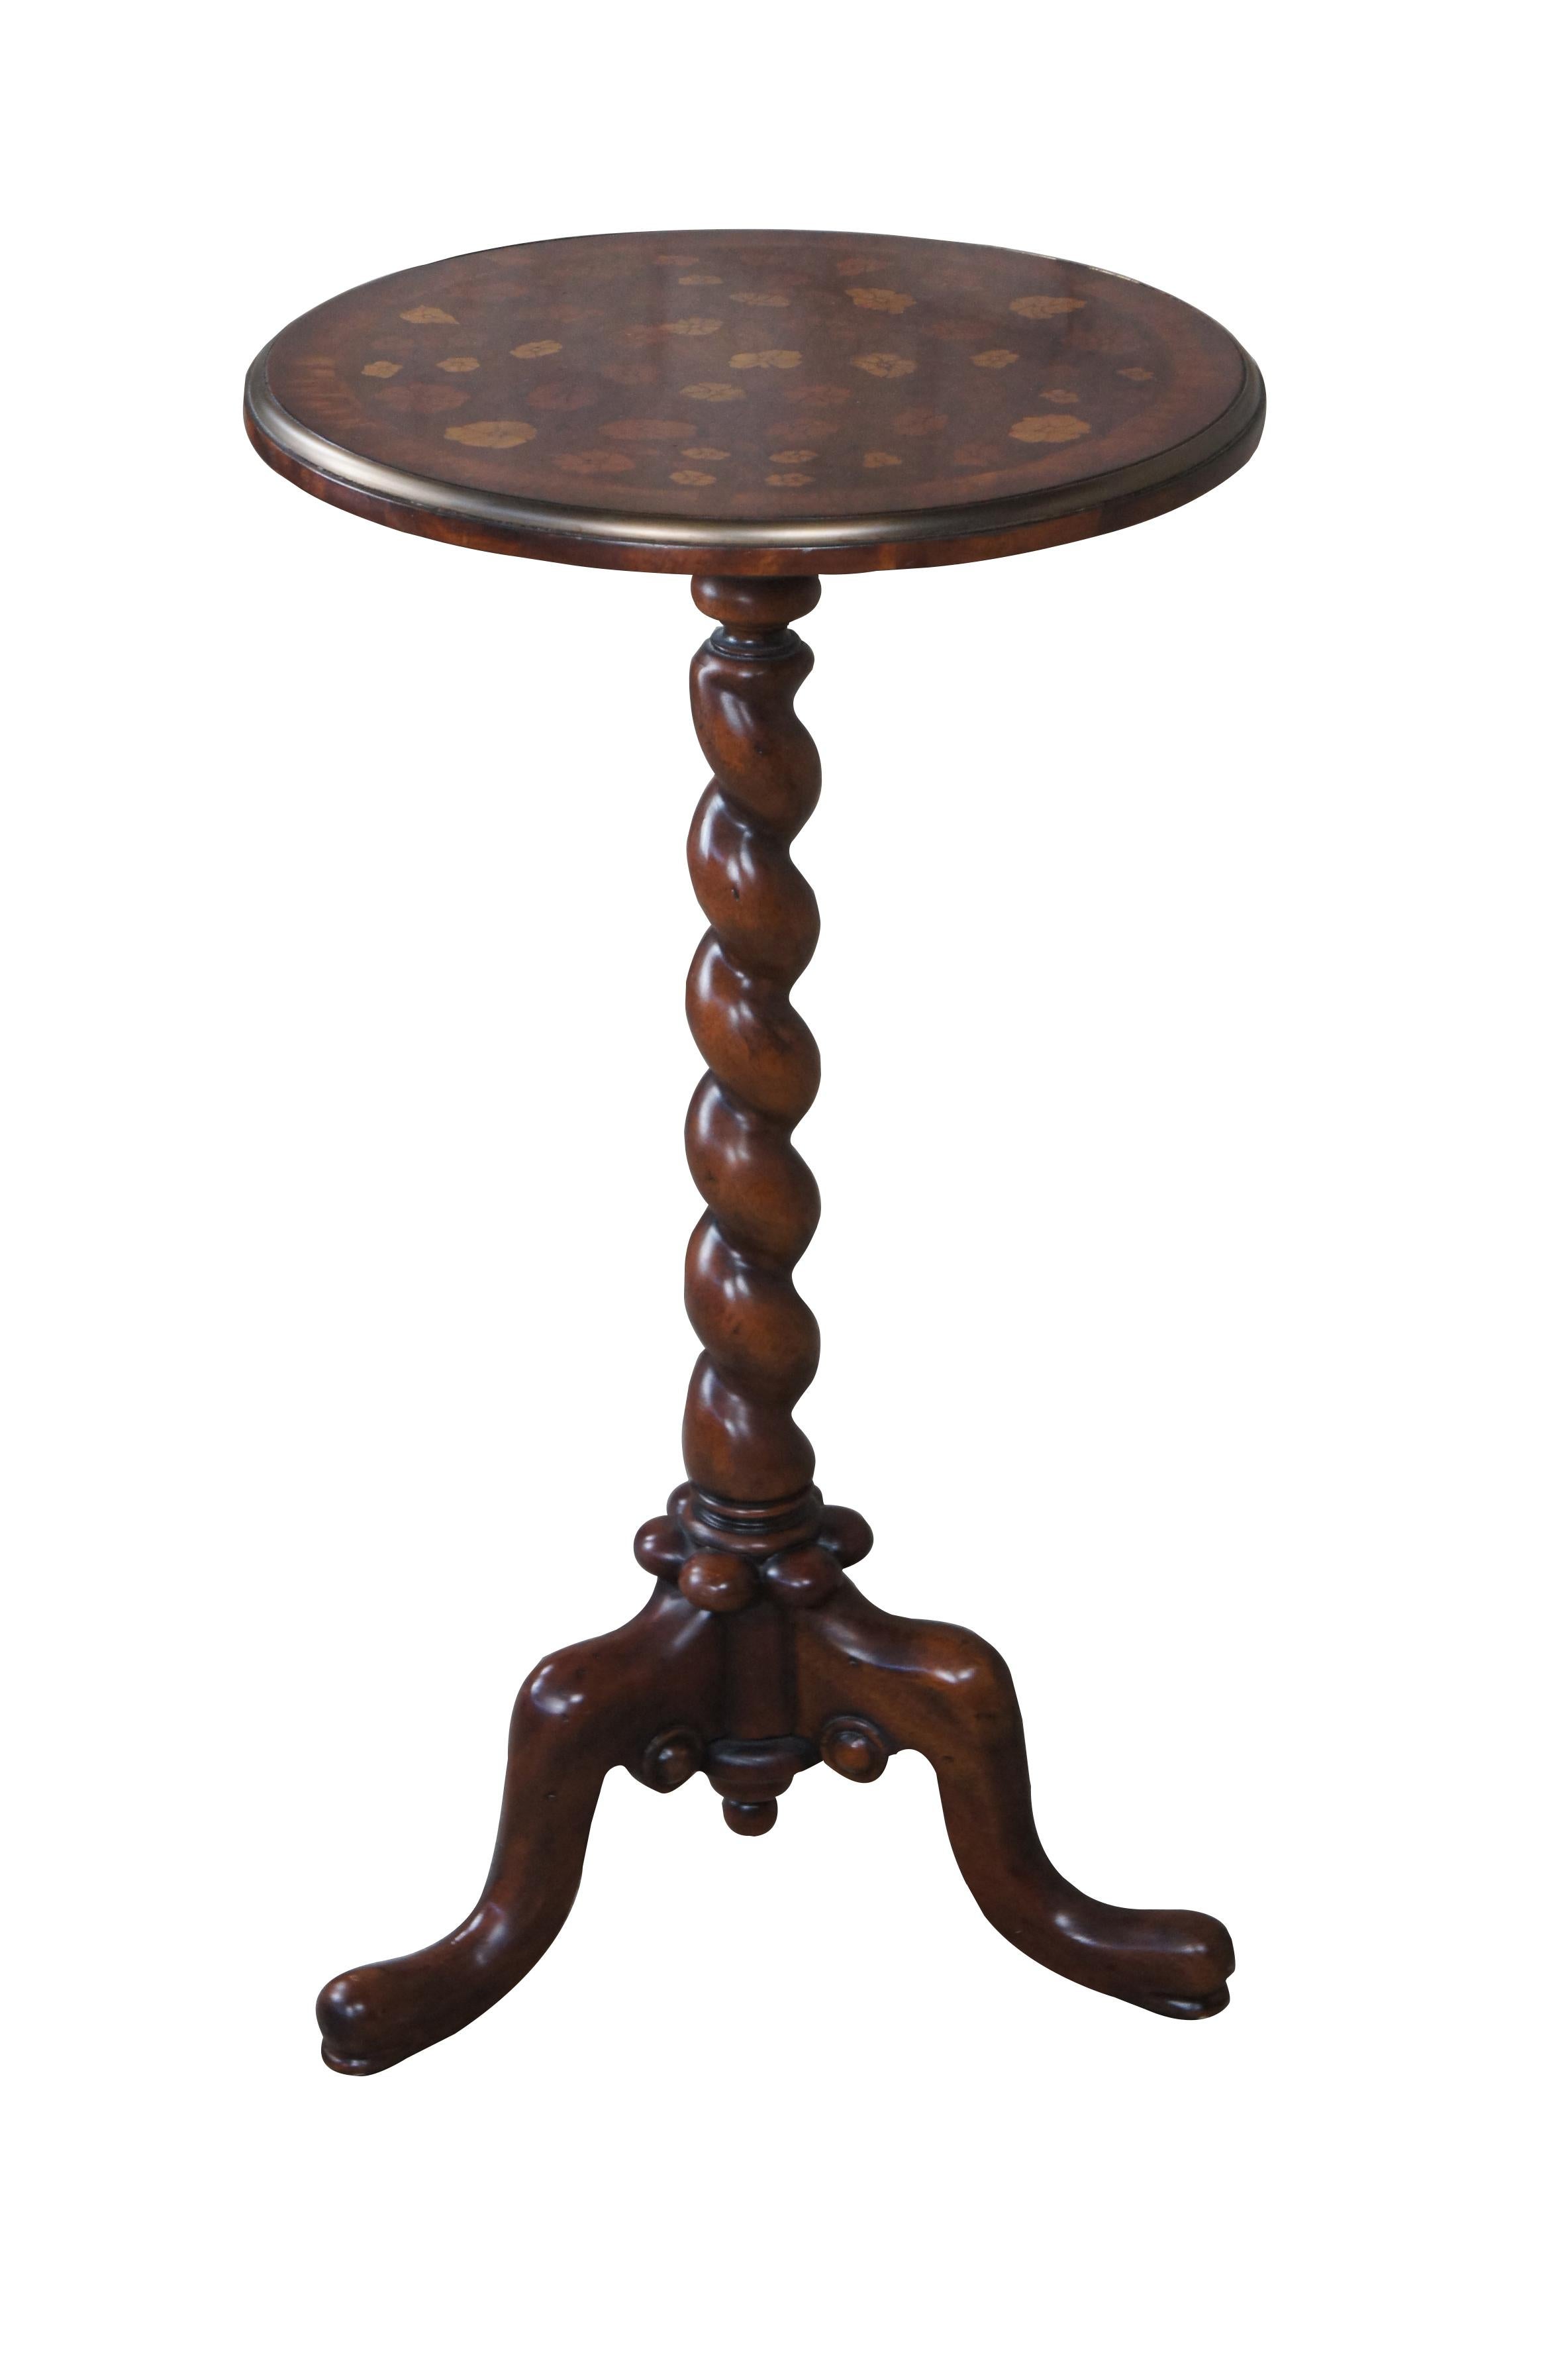 Vintage Theodore Alexander sculpture pedestal, lamp table or plant stand. Inspired by the likes of William & Mary styling which was prolific in Early Americana and Britain until the early 1700s. Made of mahogany featuring round form with brass